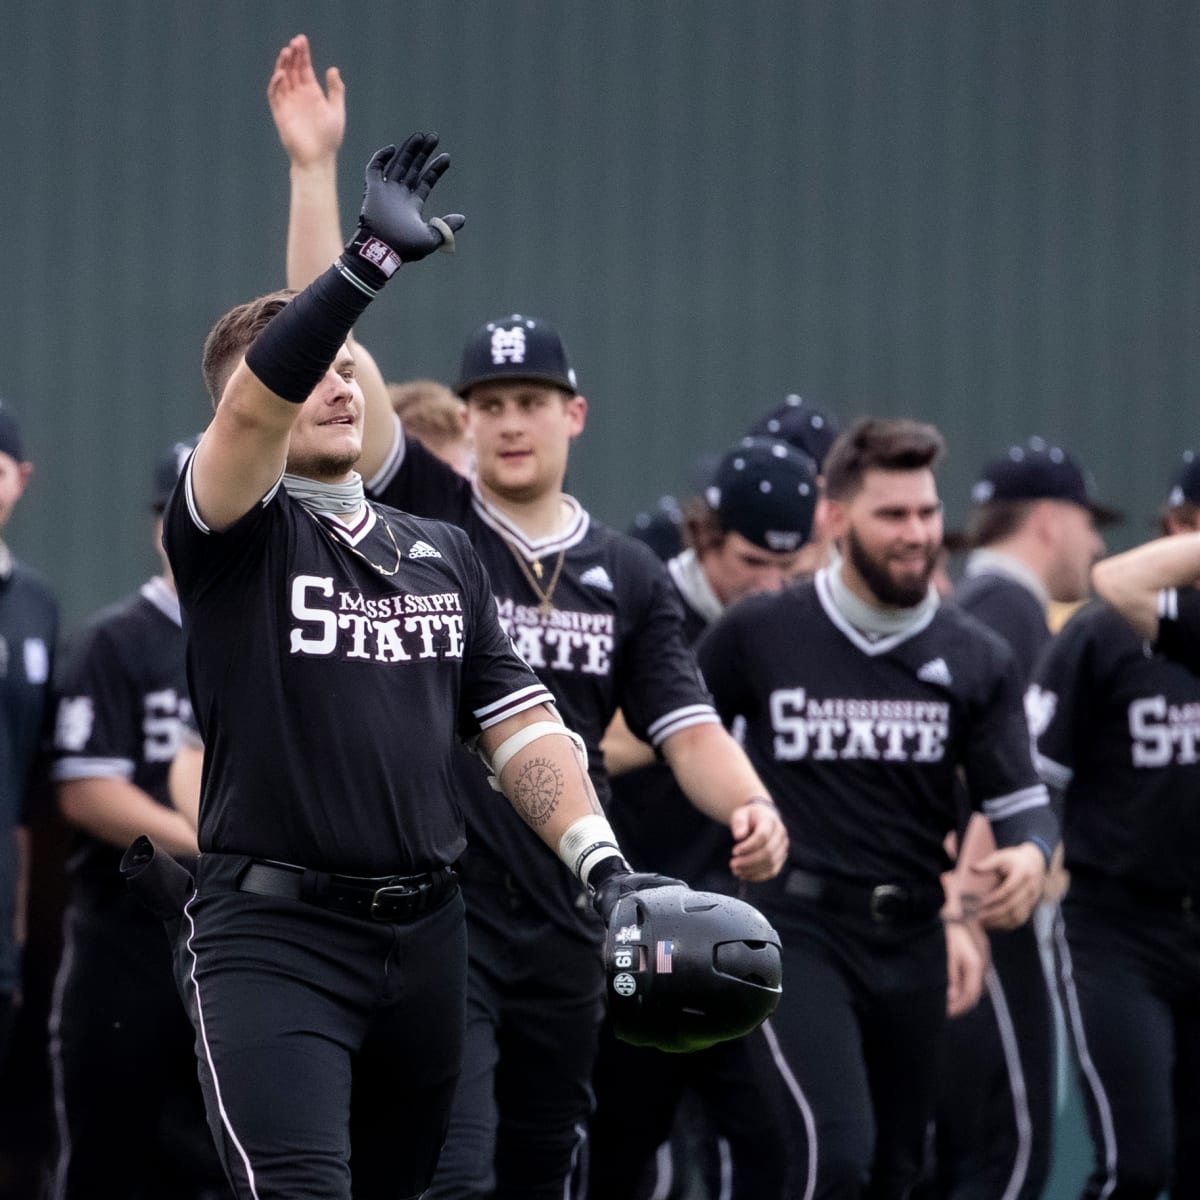 MSU Reveals New All-black Baseball Uniforms - For Whom the Cowbell